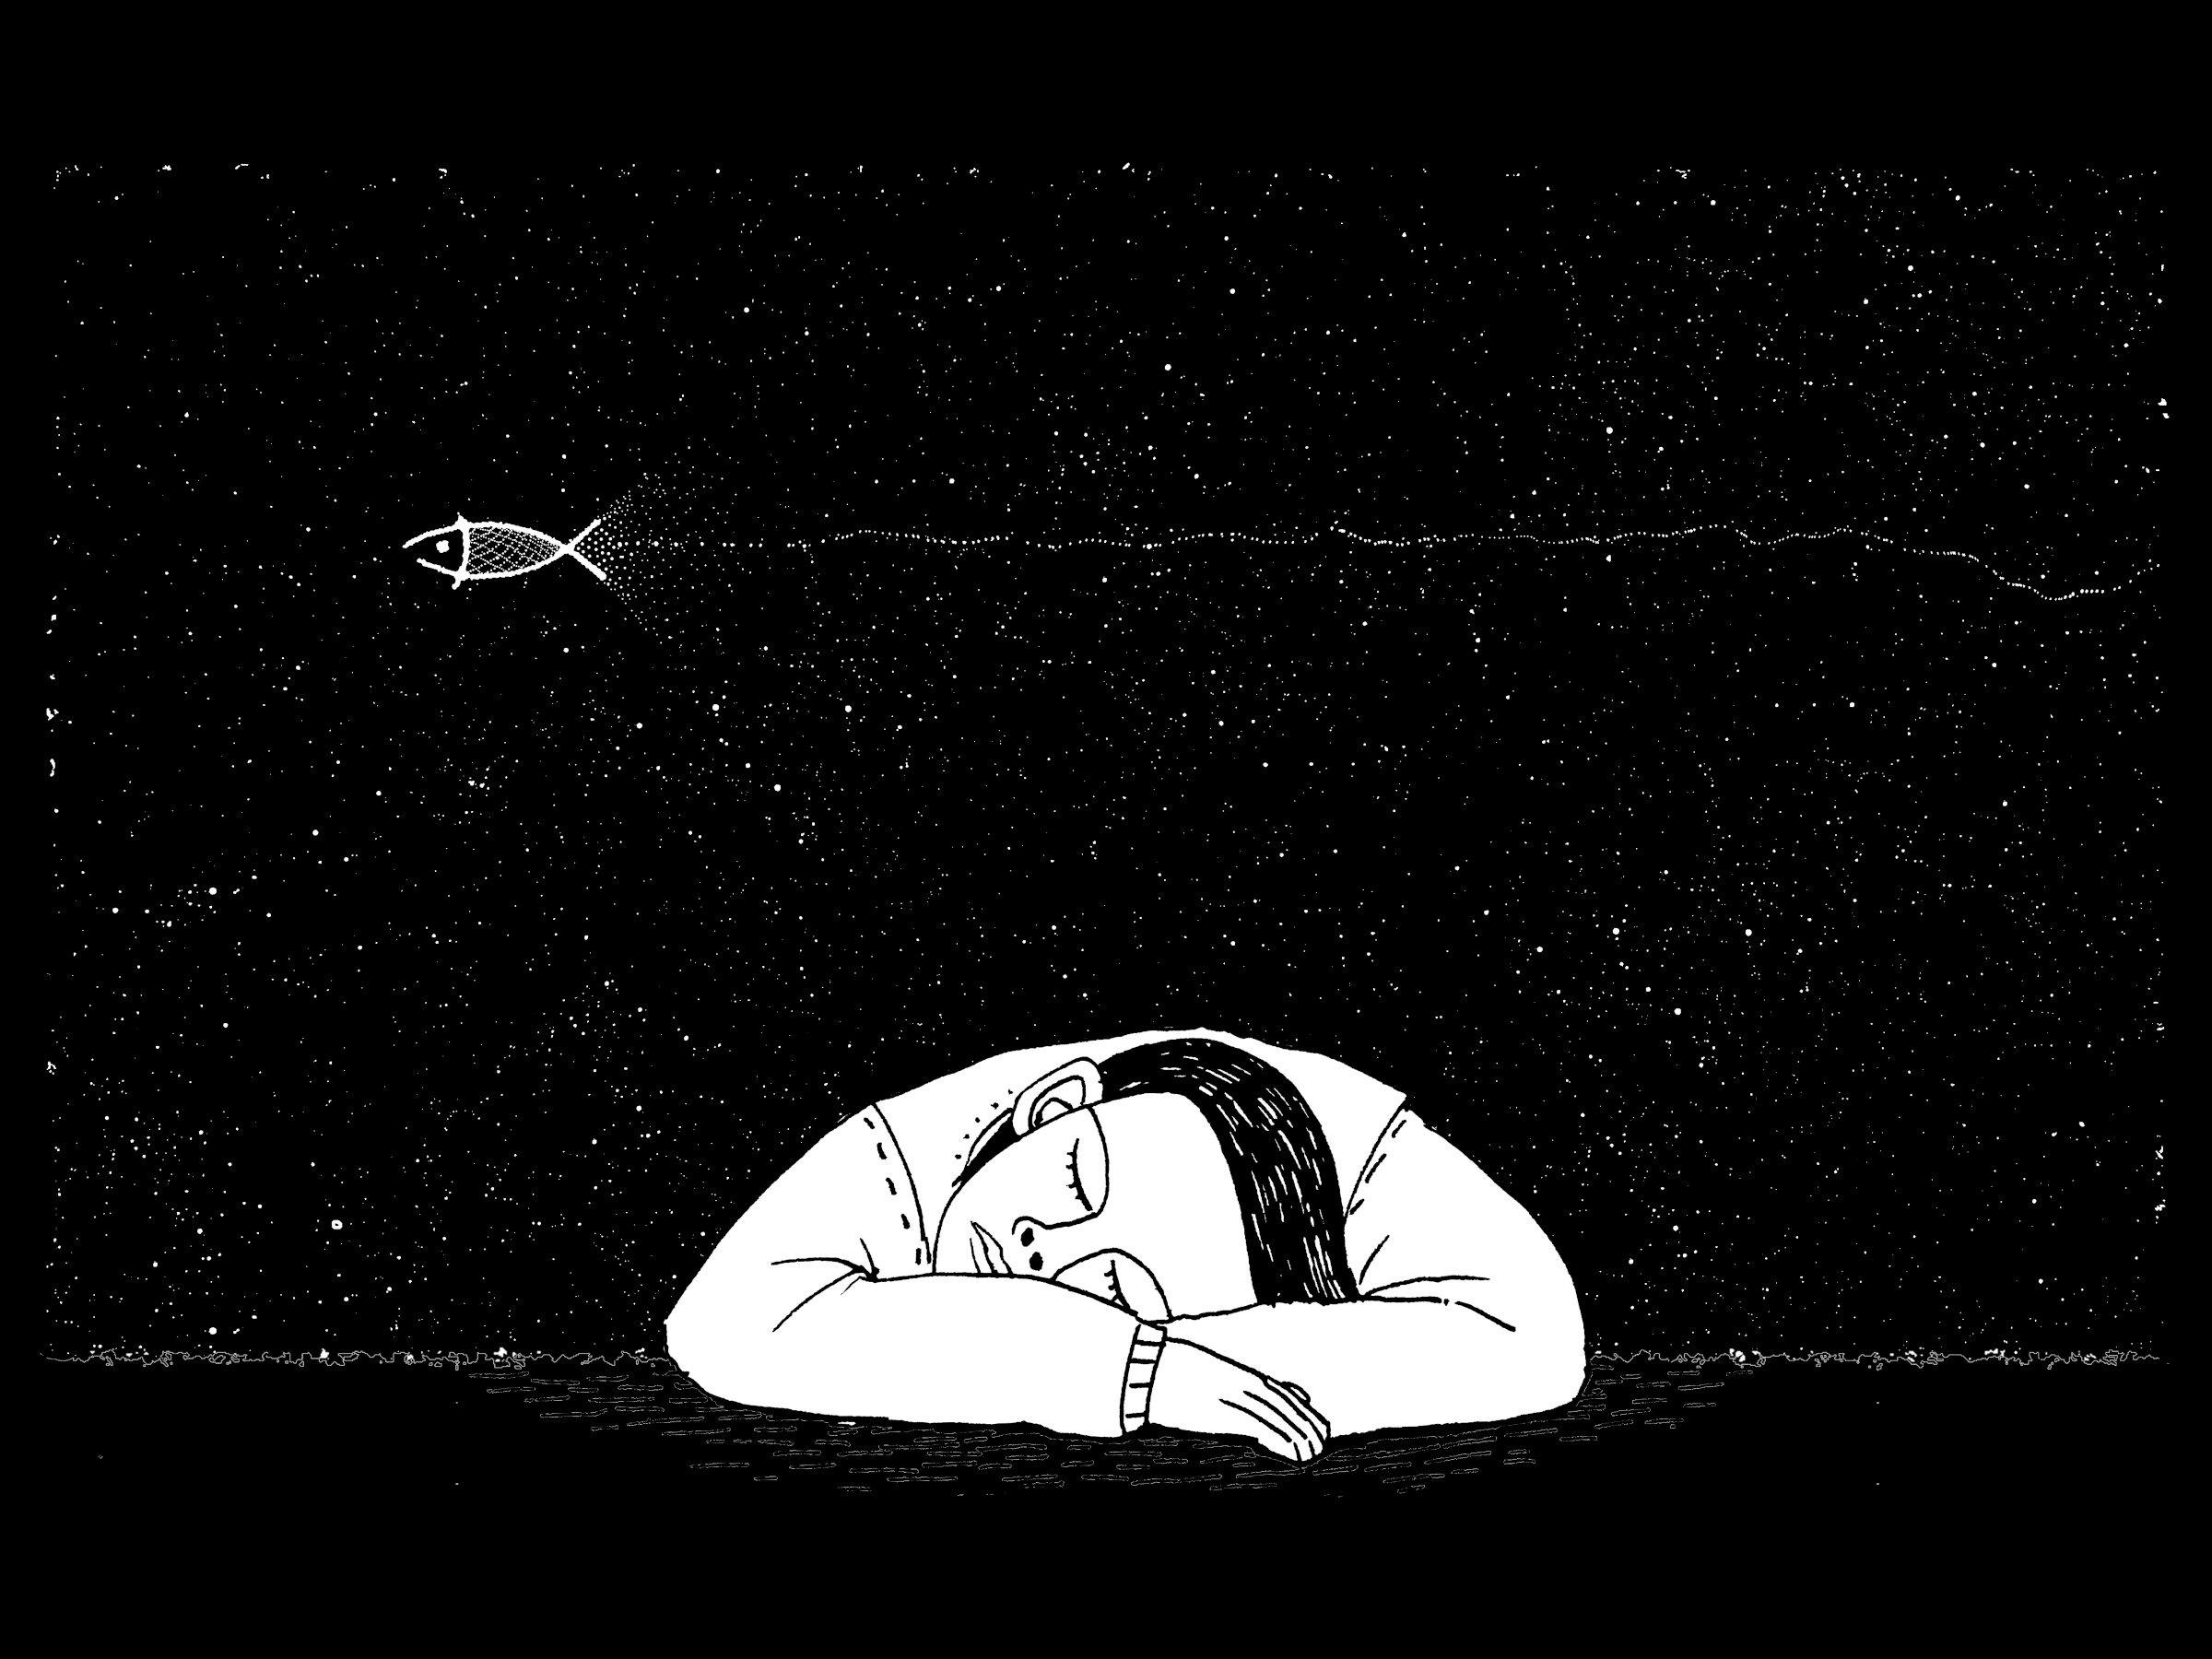 Sleep learning: illustration of a man sleeping and dreaming of a flying fish